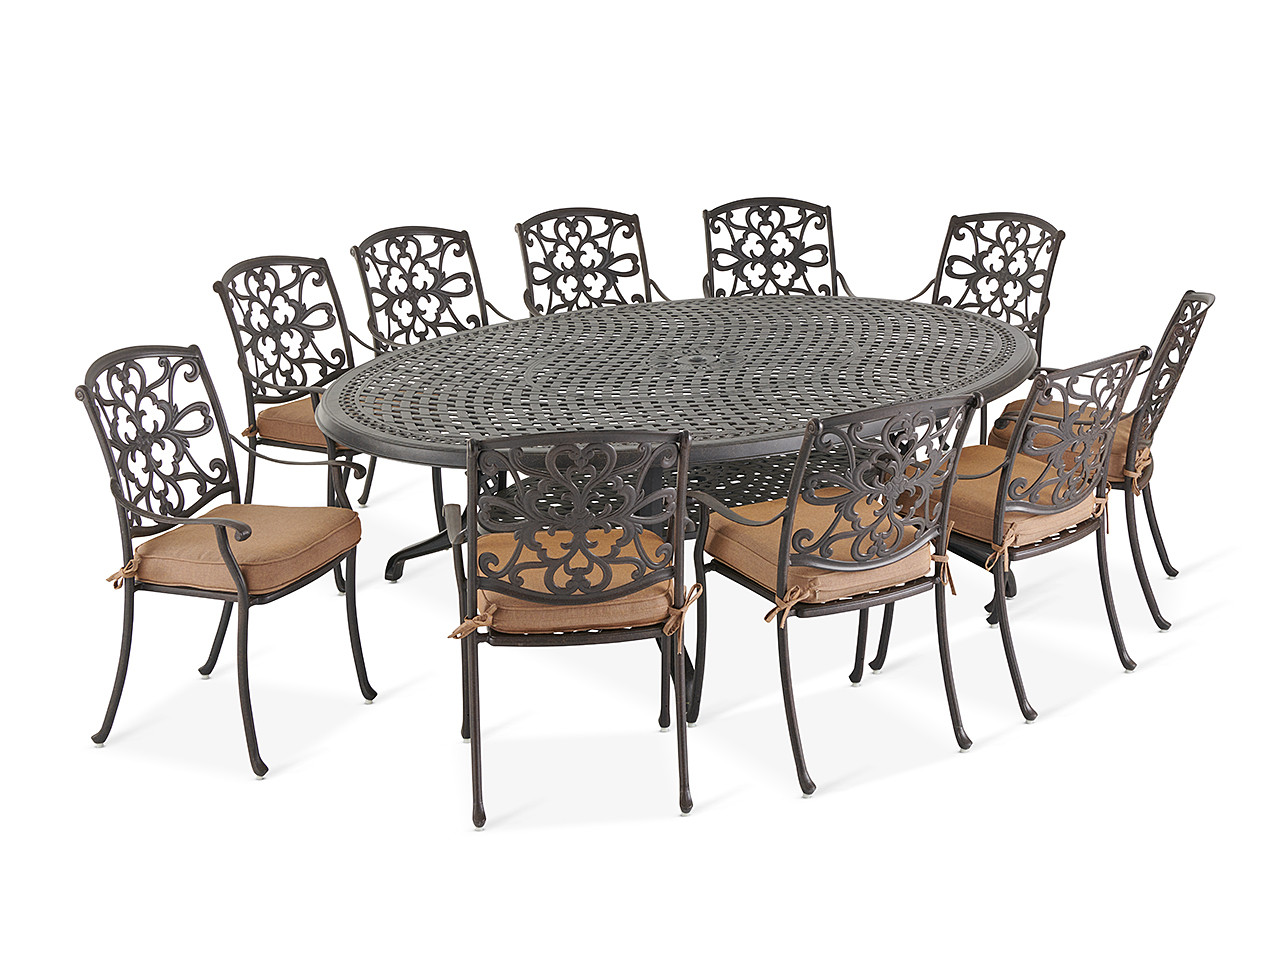 Carlisle Aged Bronze Cast Aluminum and Cast Teak Cushion 11 Pc. Dining Set with 98 x 69 in. Table